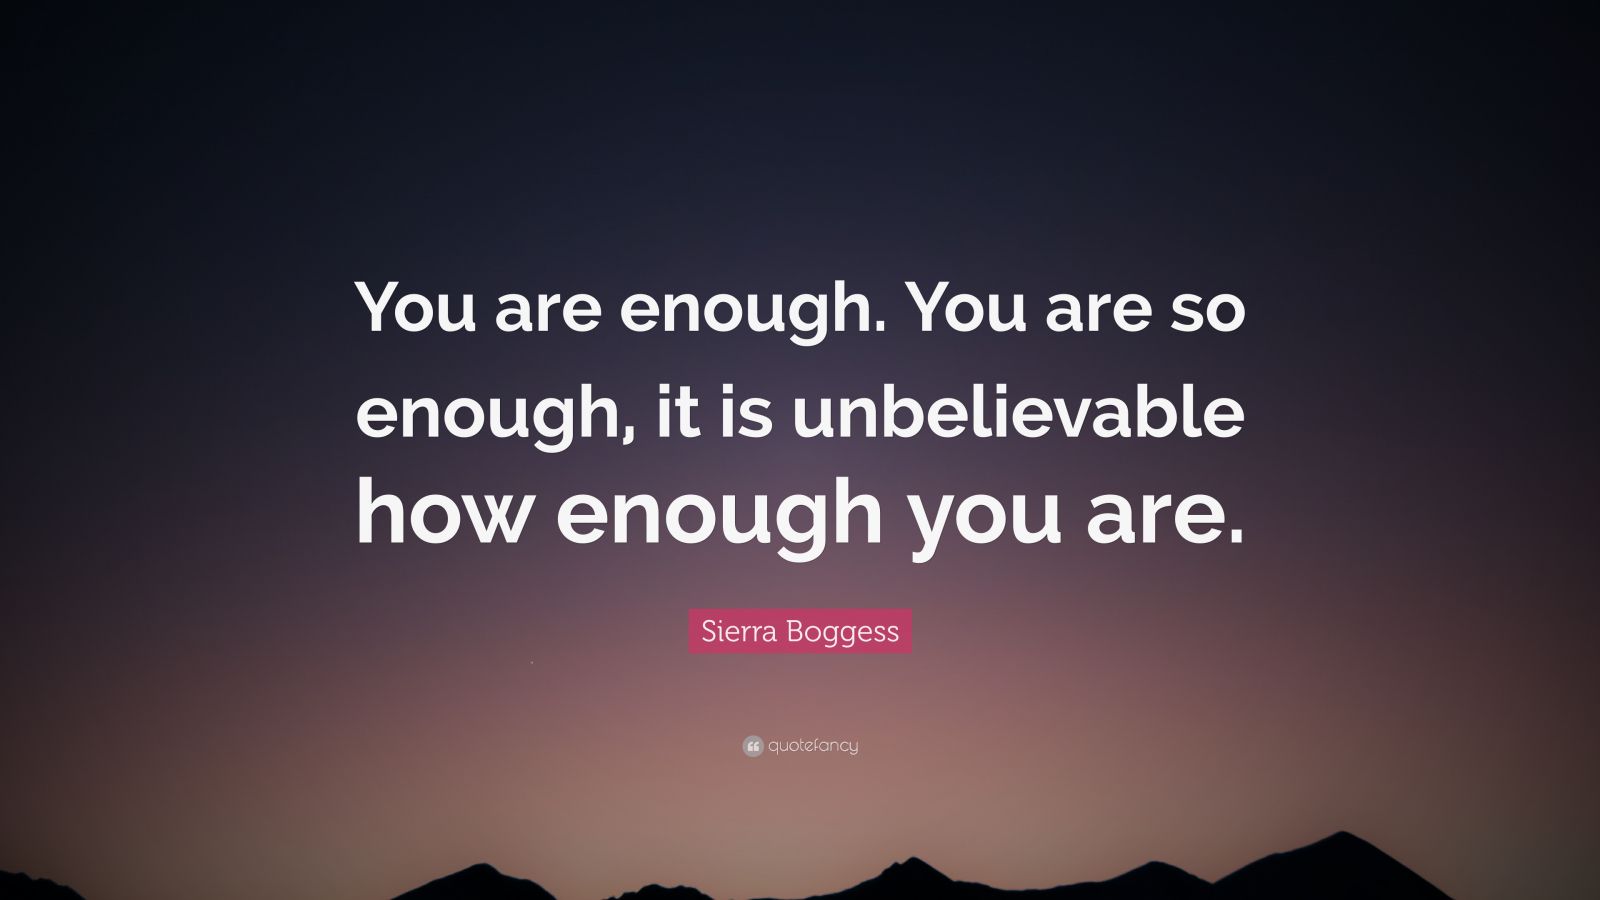 Sierra Boggess Quote: "You are enough. You are so enough, it is unbelievable how enough you are ...